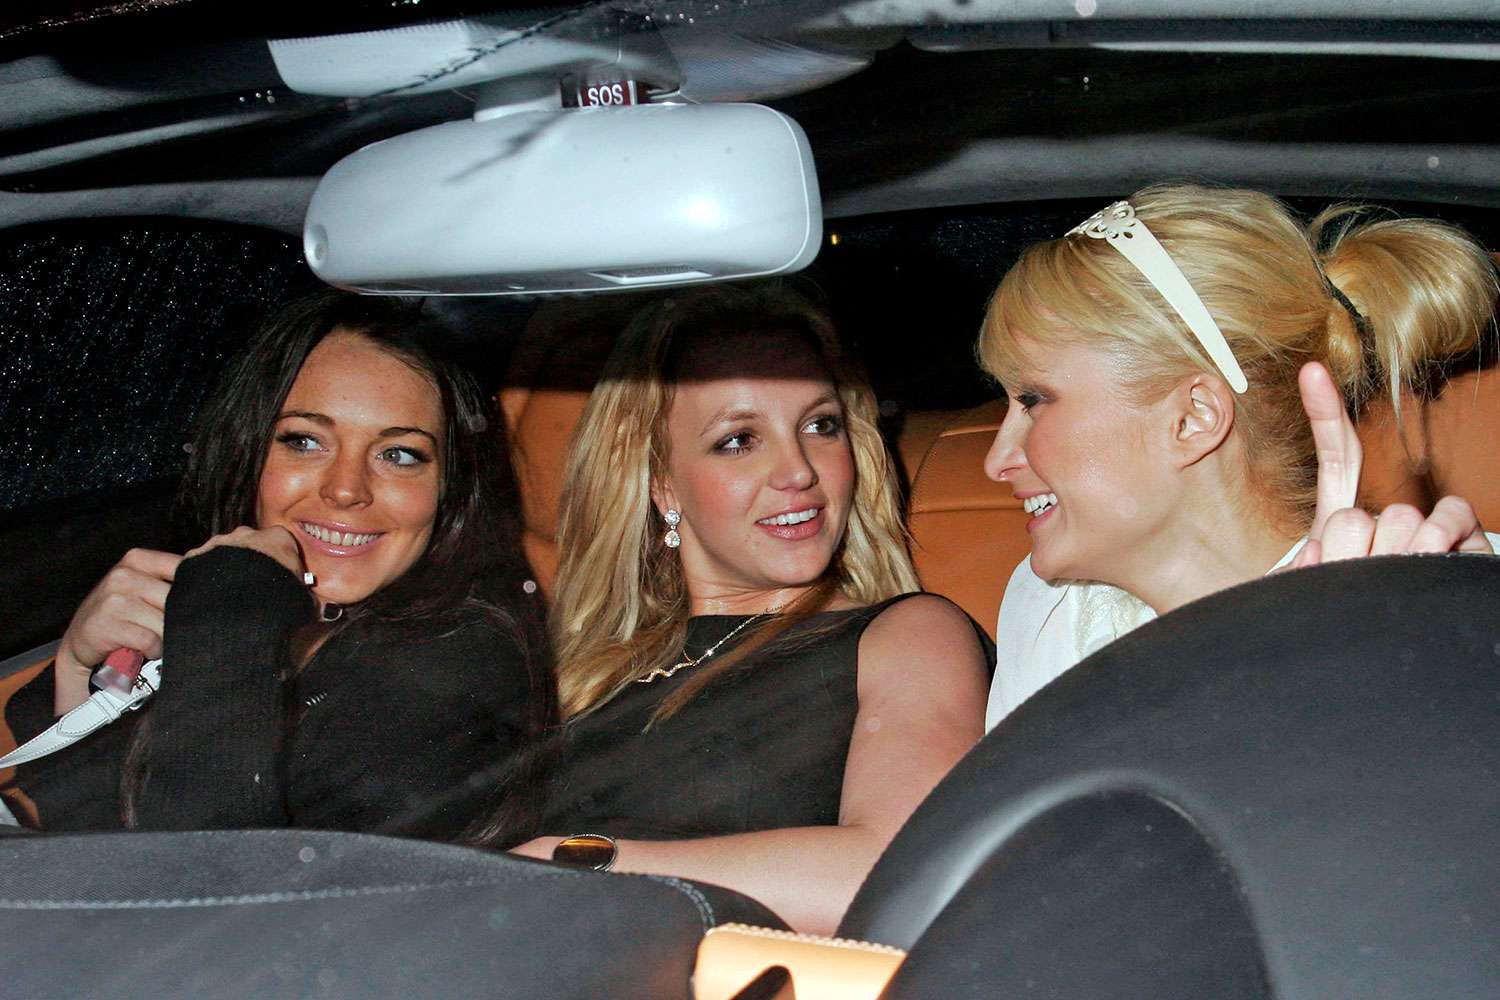 Paris Hilton commemorates anniversary of photo with her, Lindsay Lohan, and Britney Spears thumbnail